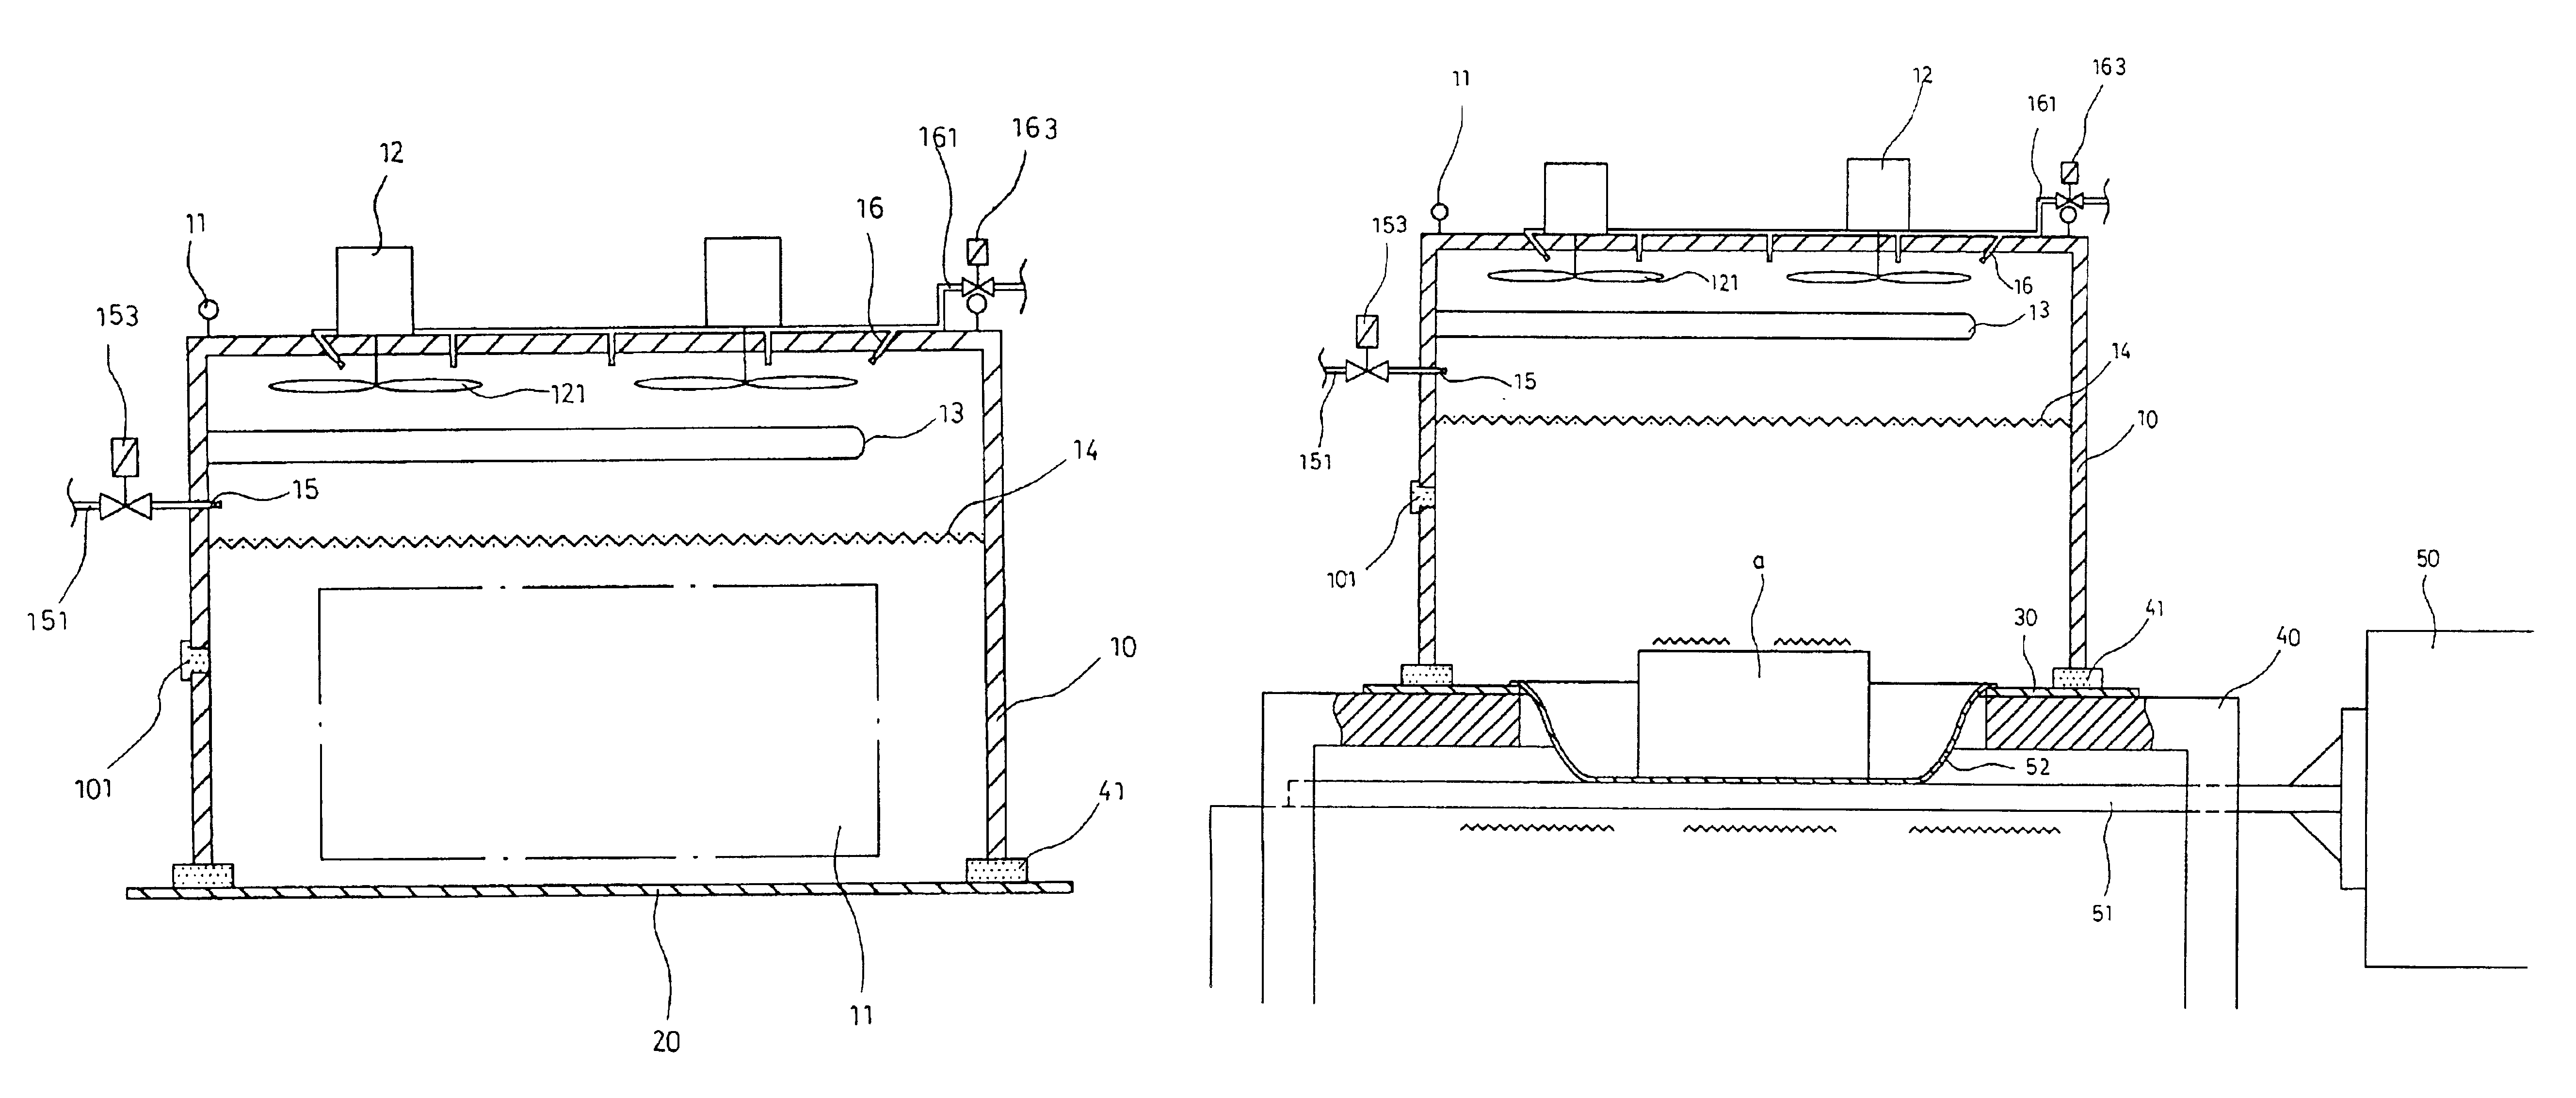 Flexible and mobile high transition rate of temperature test devices